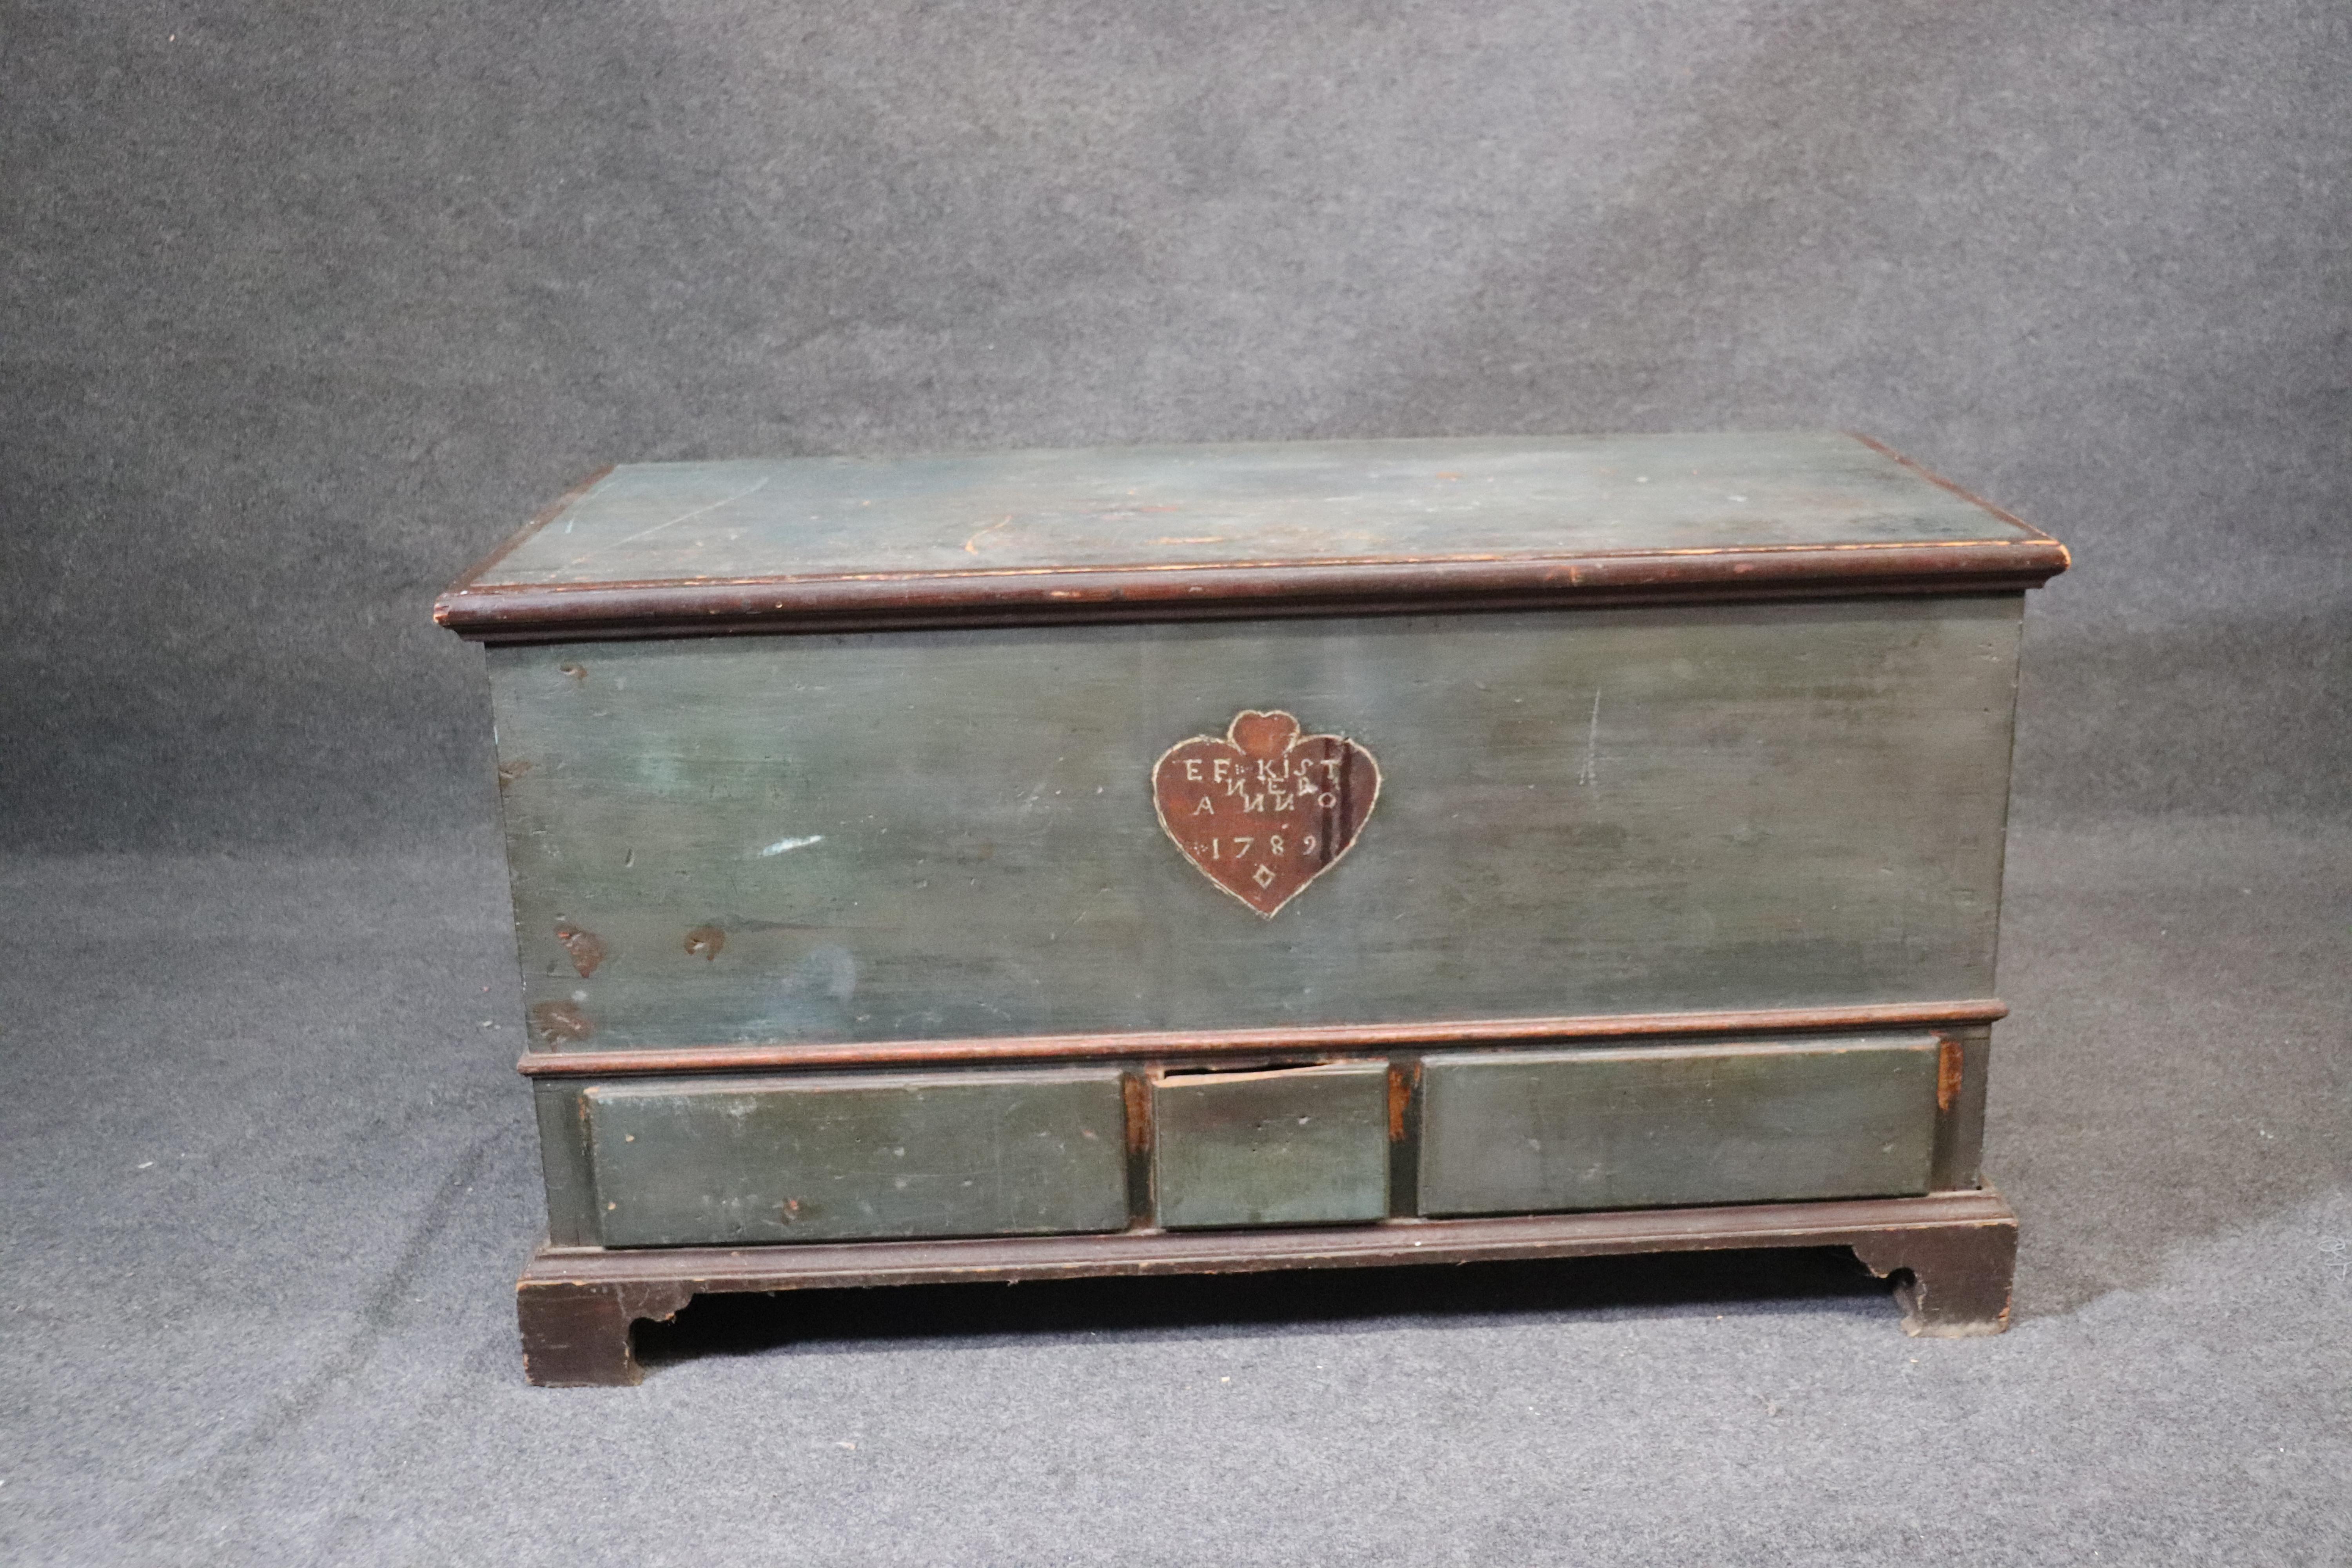 This original Pennsylvania blanket chest is dated and signed 1789 and was even sold by another antique dealer in the late 1800s. The blanket chest appears to be completely original and in tact with no apparent damage or missing pieces. The piece